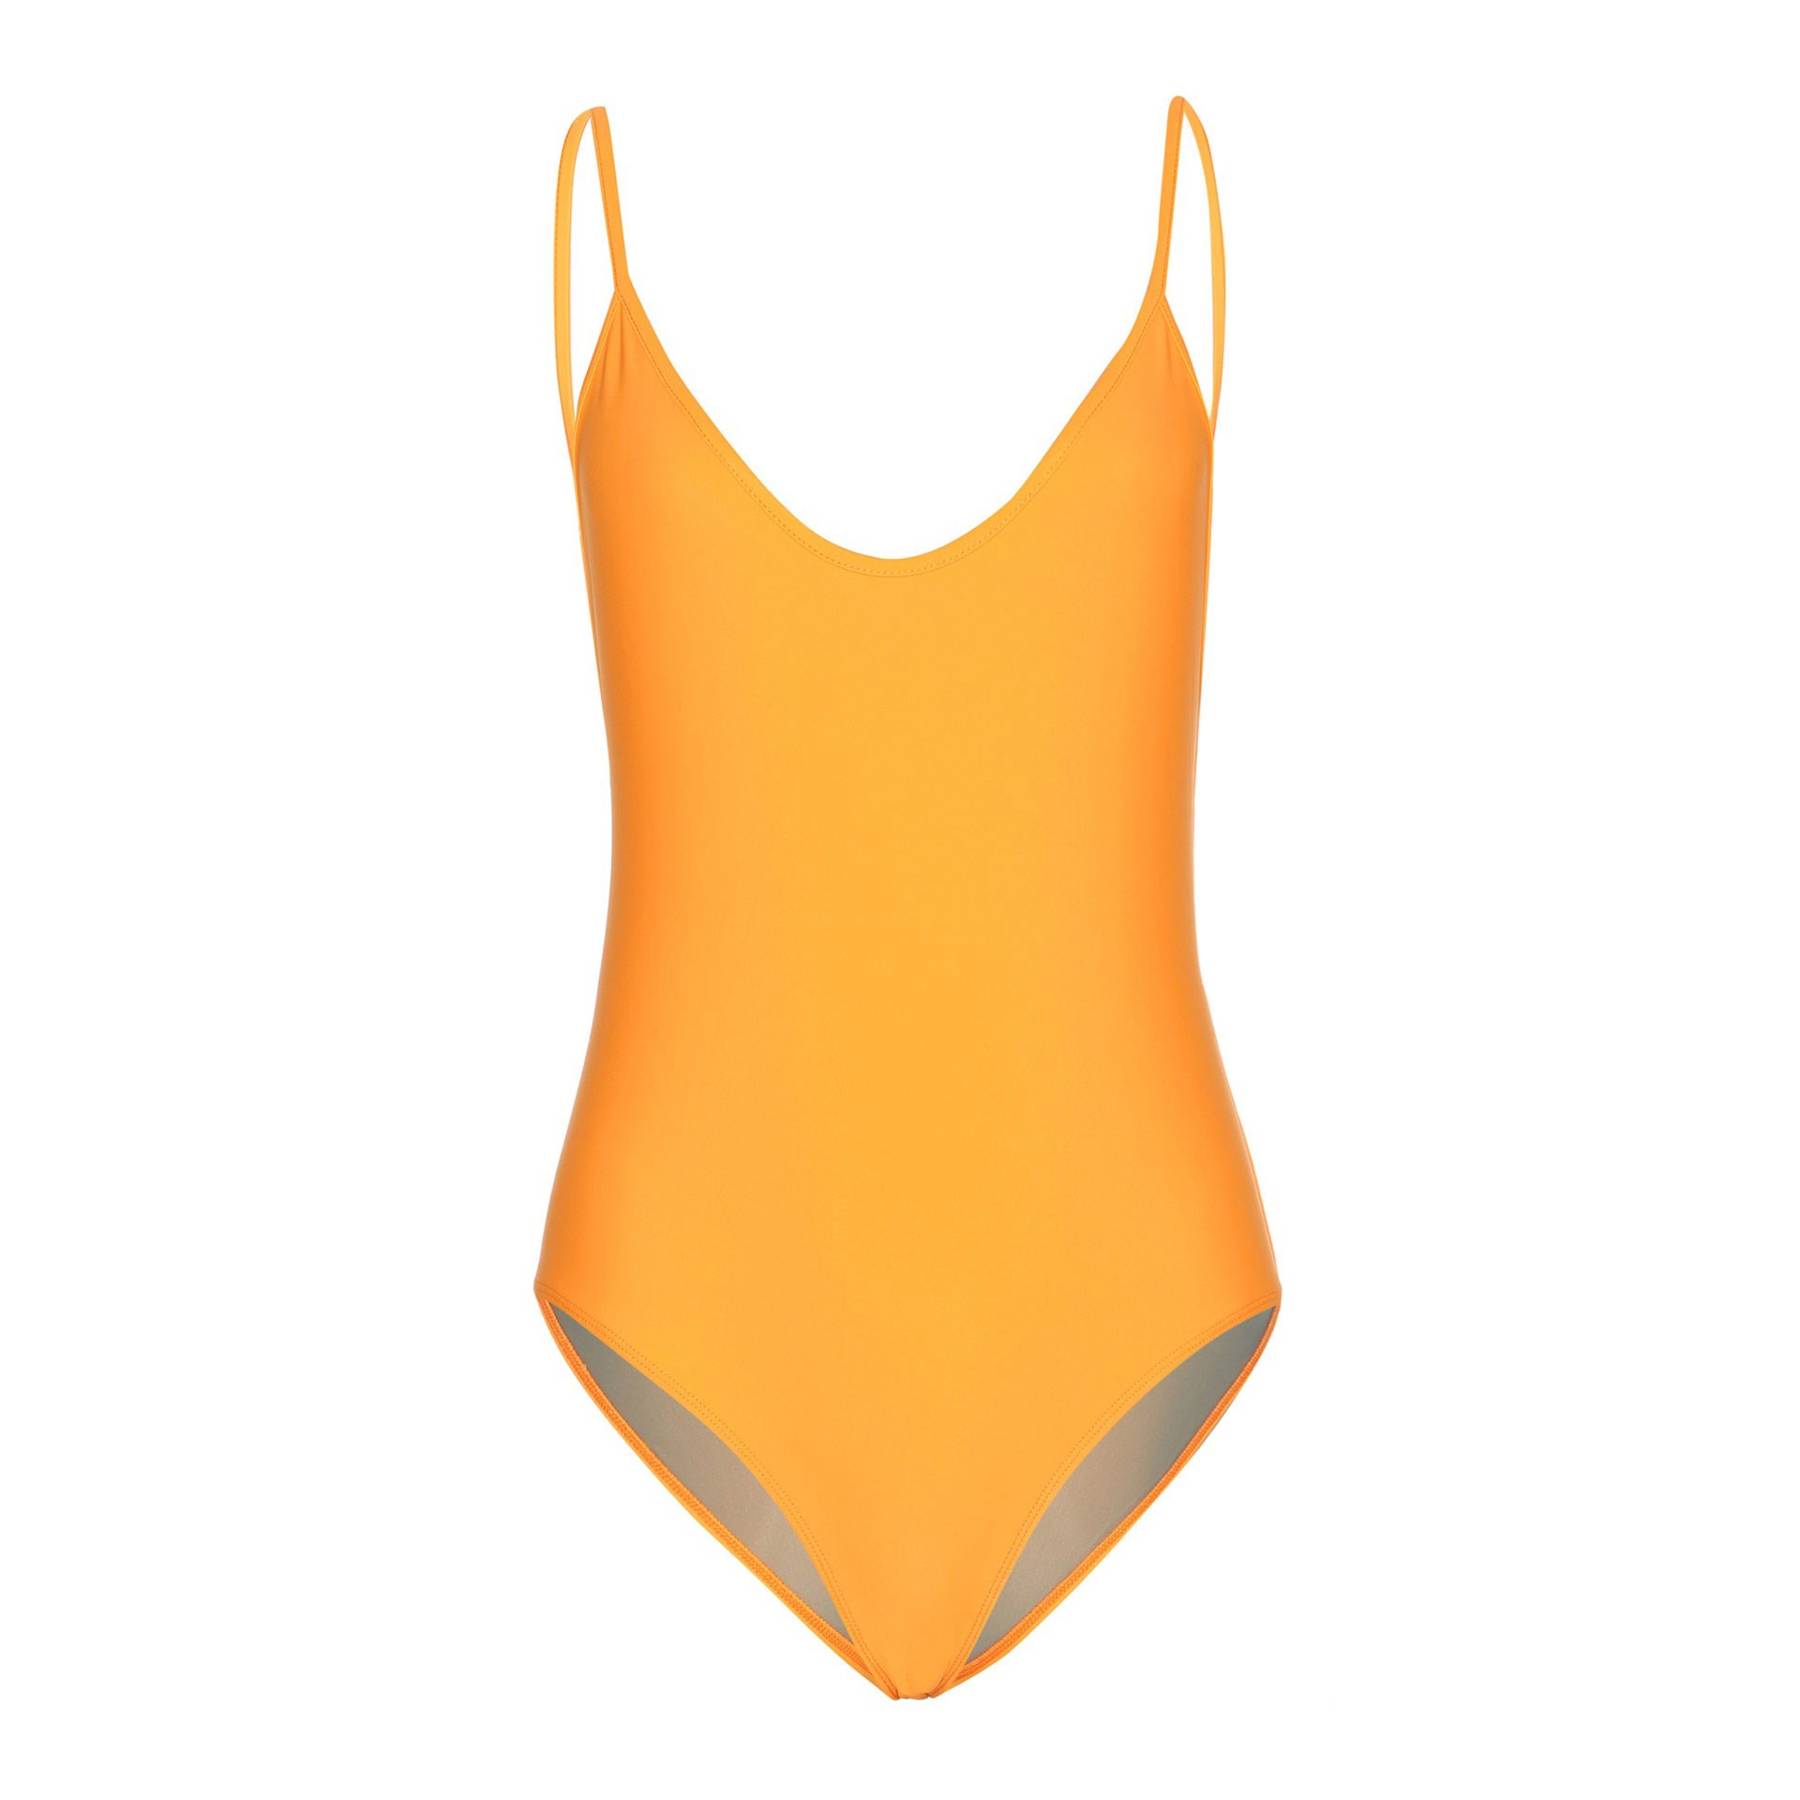 10 swimming costumes for summer holidays | Glamour UK